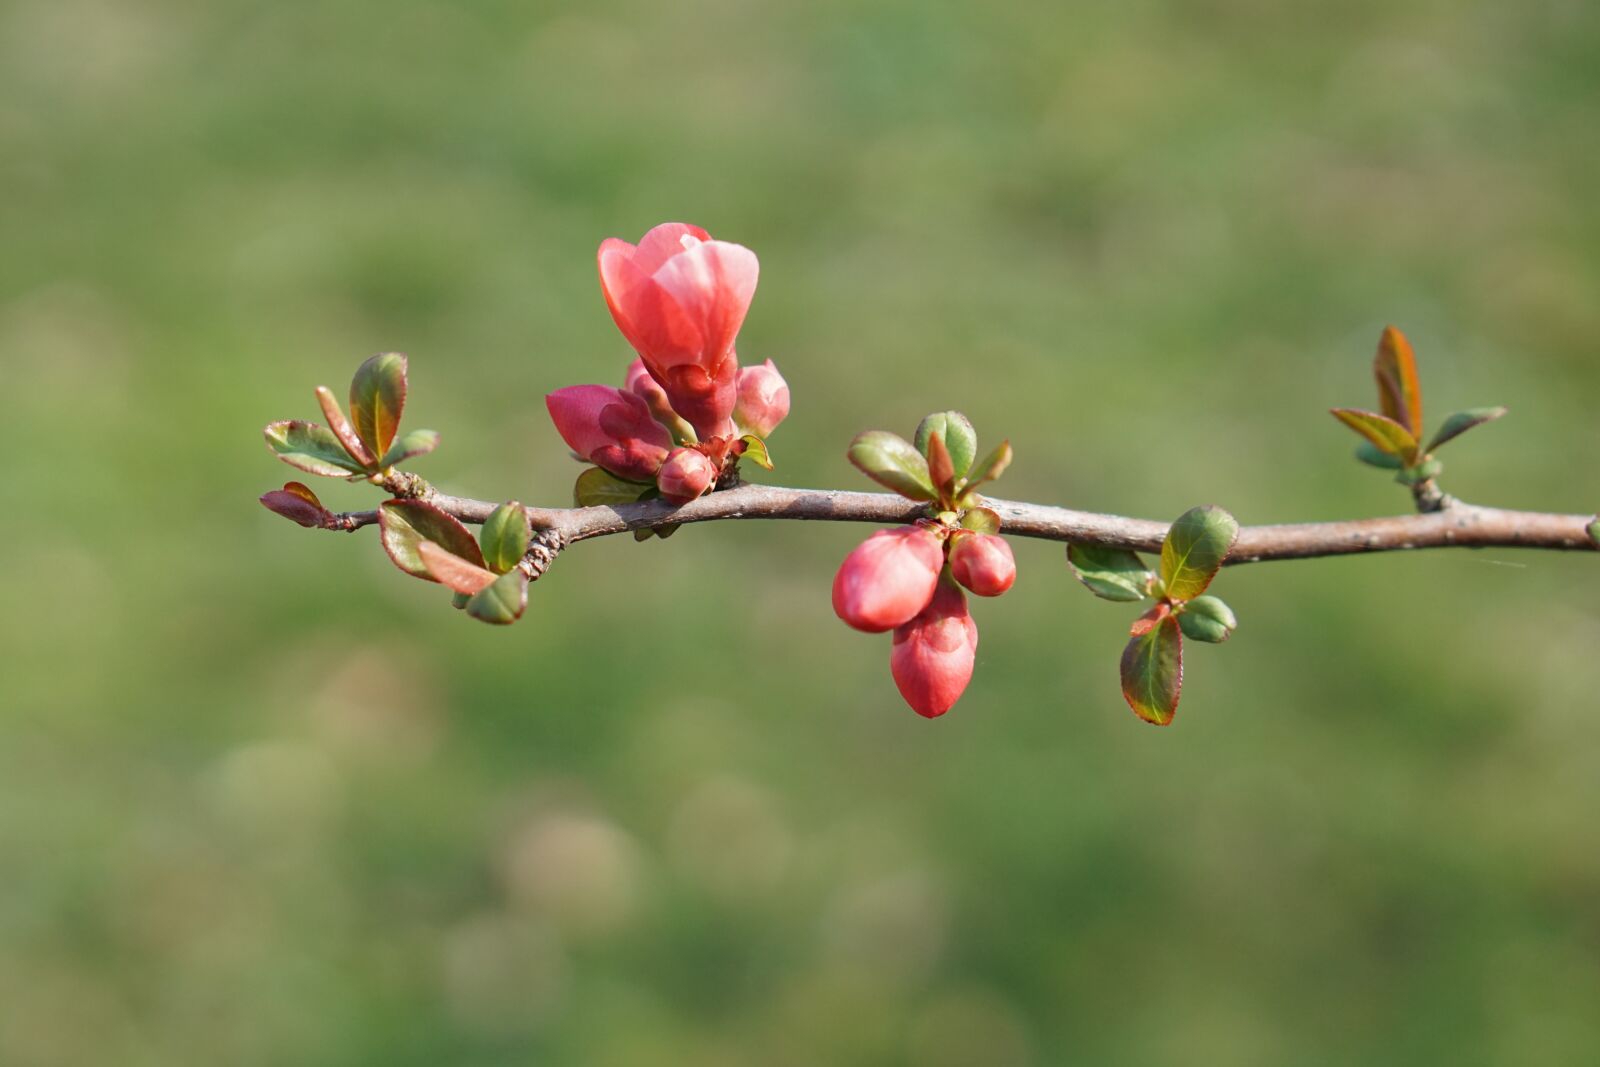 Sony a5100 + E 50mm F1.8 OSS sample photo. Spring, bud, nature photography